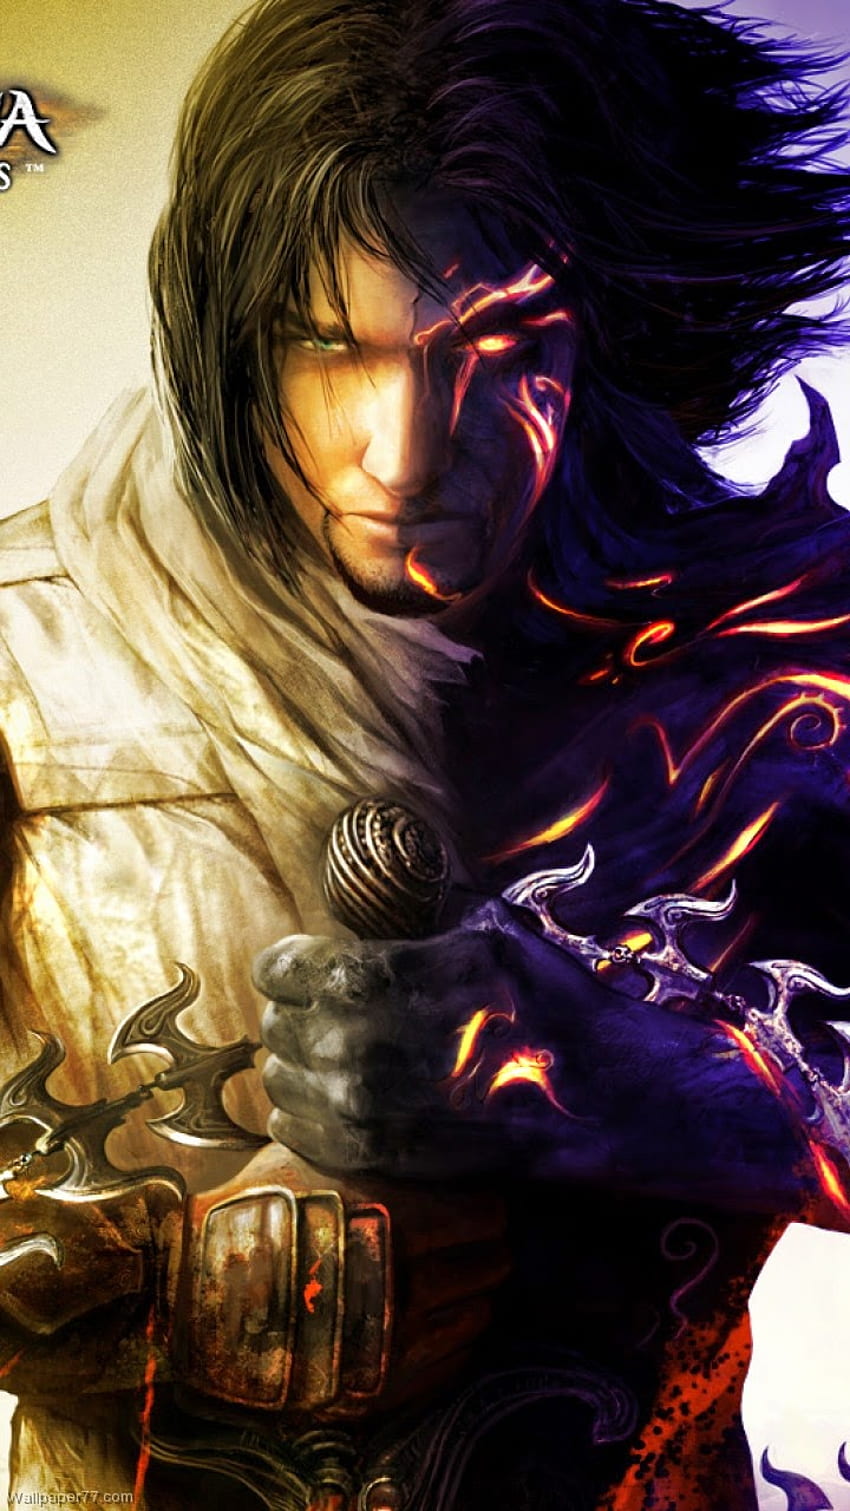 Prince Of Persia The Two Thrones Usa, Prince of Persia 3 wallpaper ponsel HD